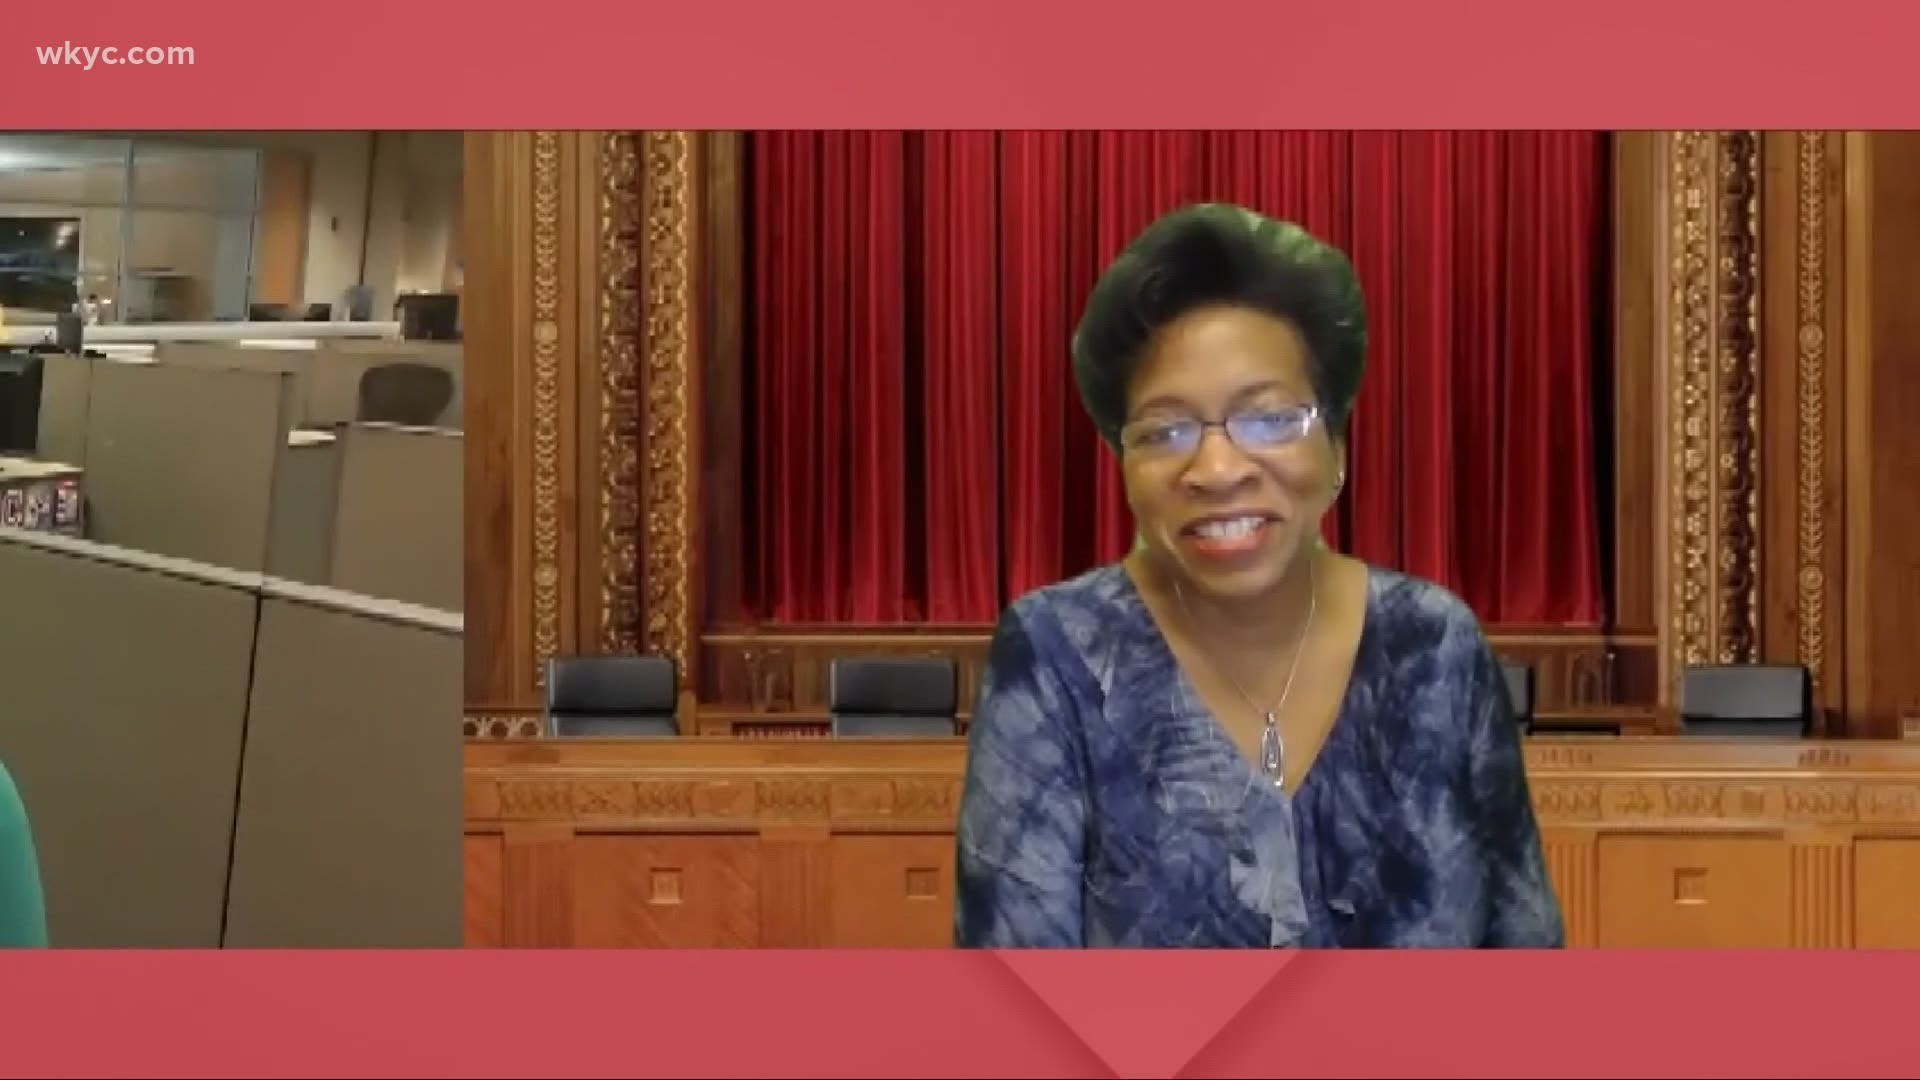 Stewart is first African American woman elected to the state's highest court. This trained pianist has brought her unique perspective to the Supreme Court of Ohio.